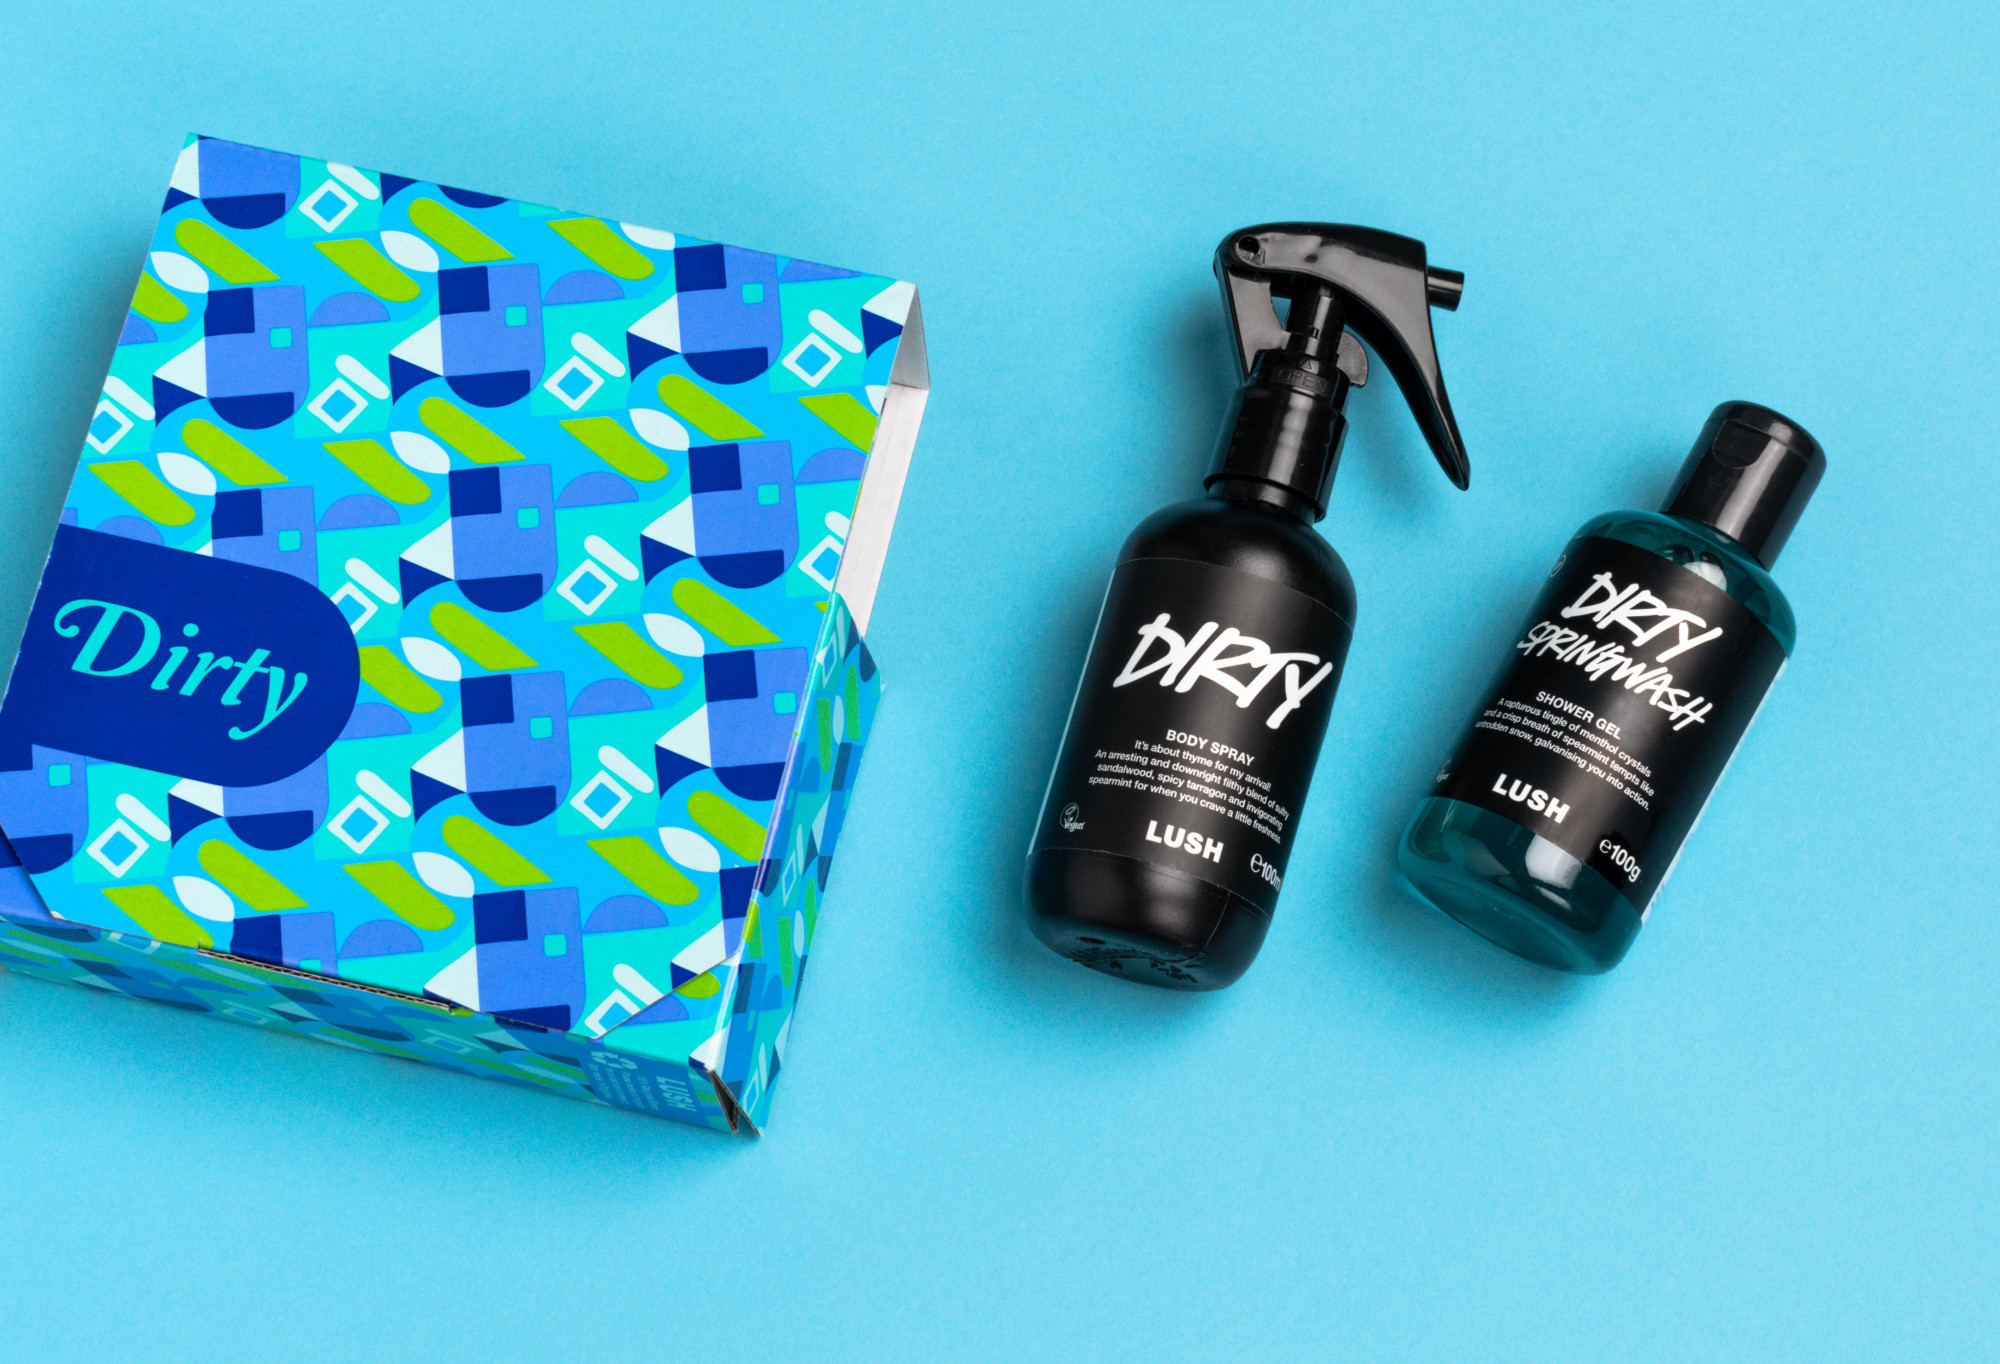 Dirty (the gift) box and its contents (100ml Body Spray and 100g Shower Gel) are displayed on a light blue background.